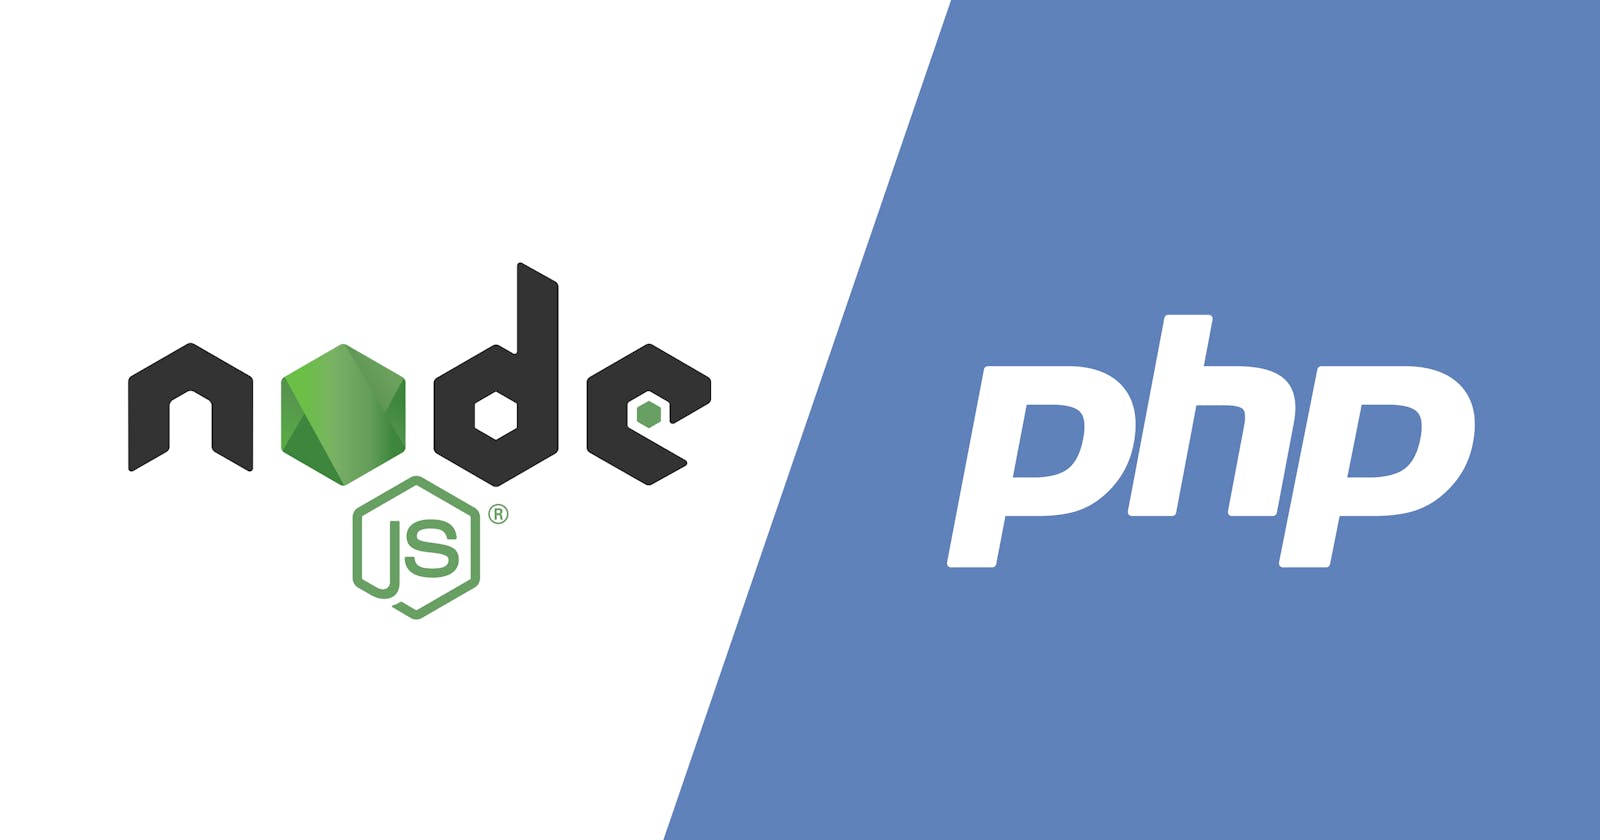 Choosing Between Node JS and PHP for Web Development